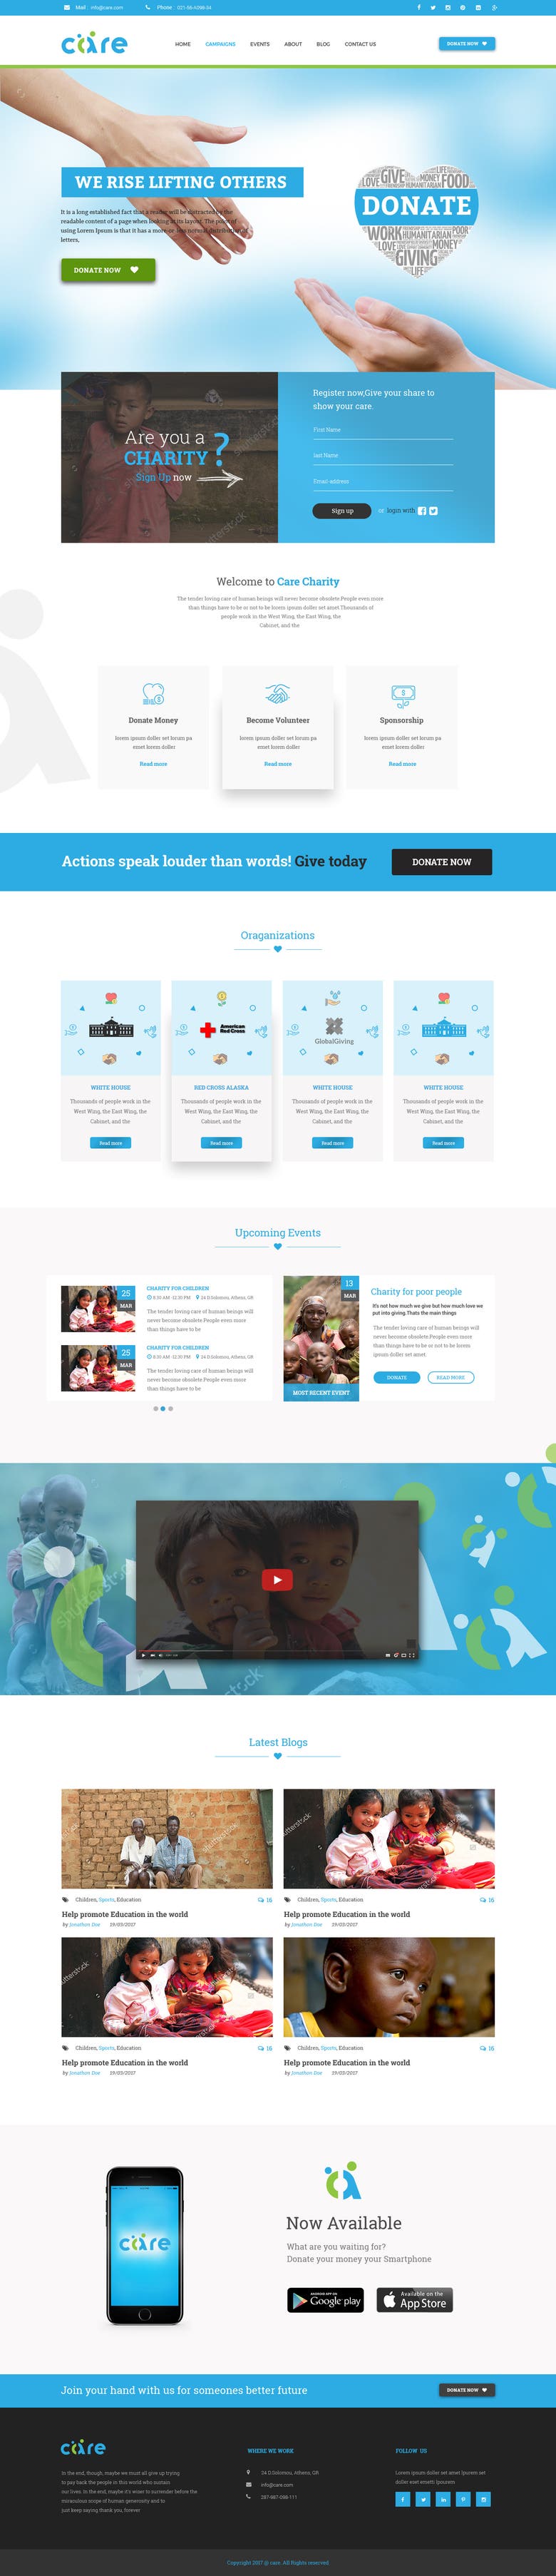 UI/UX DESIGN FOR CHARITY NETWORK